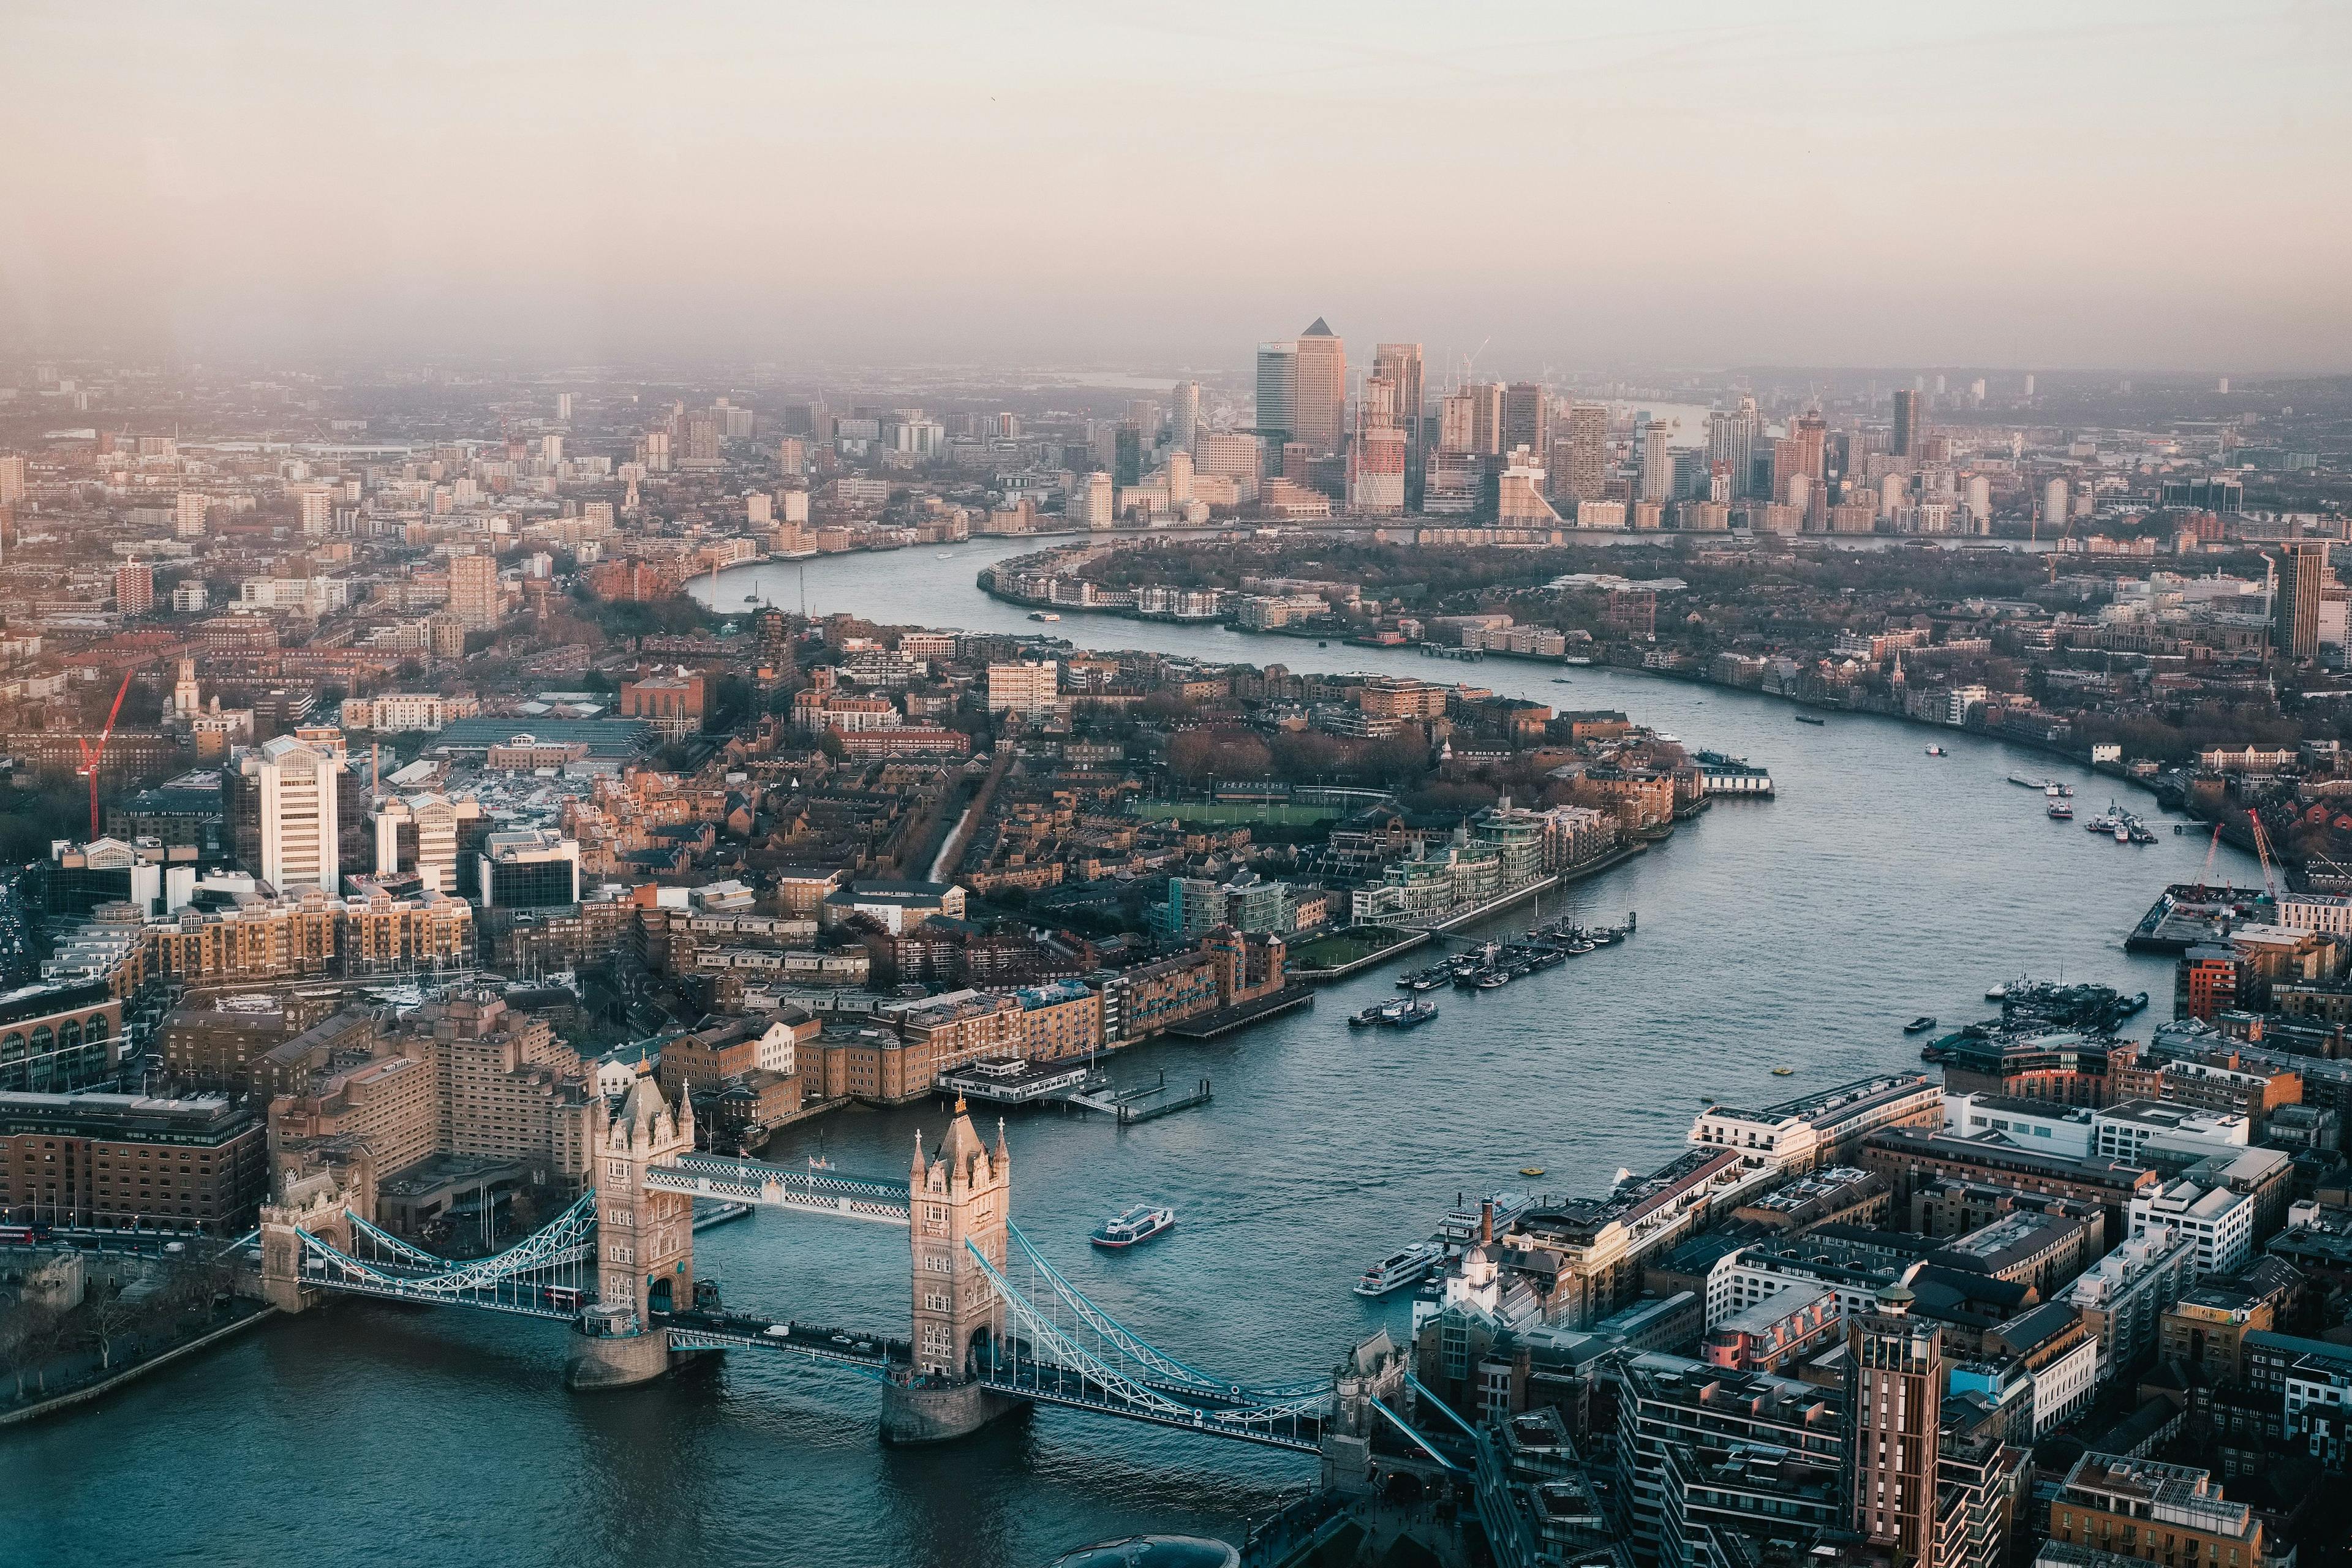 Aerial view of London with Tower Bridge and the river Thames